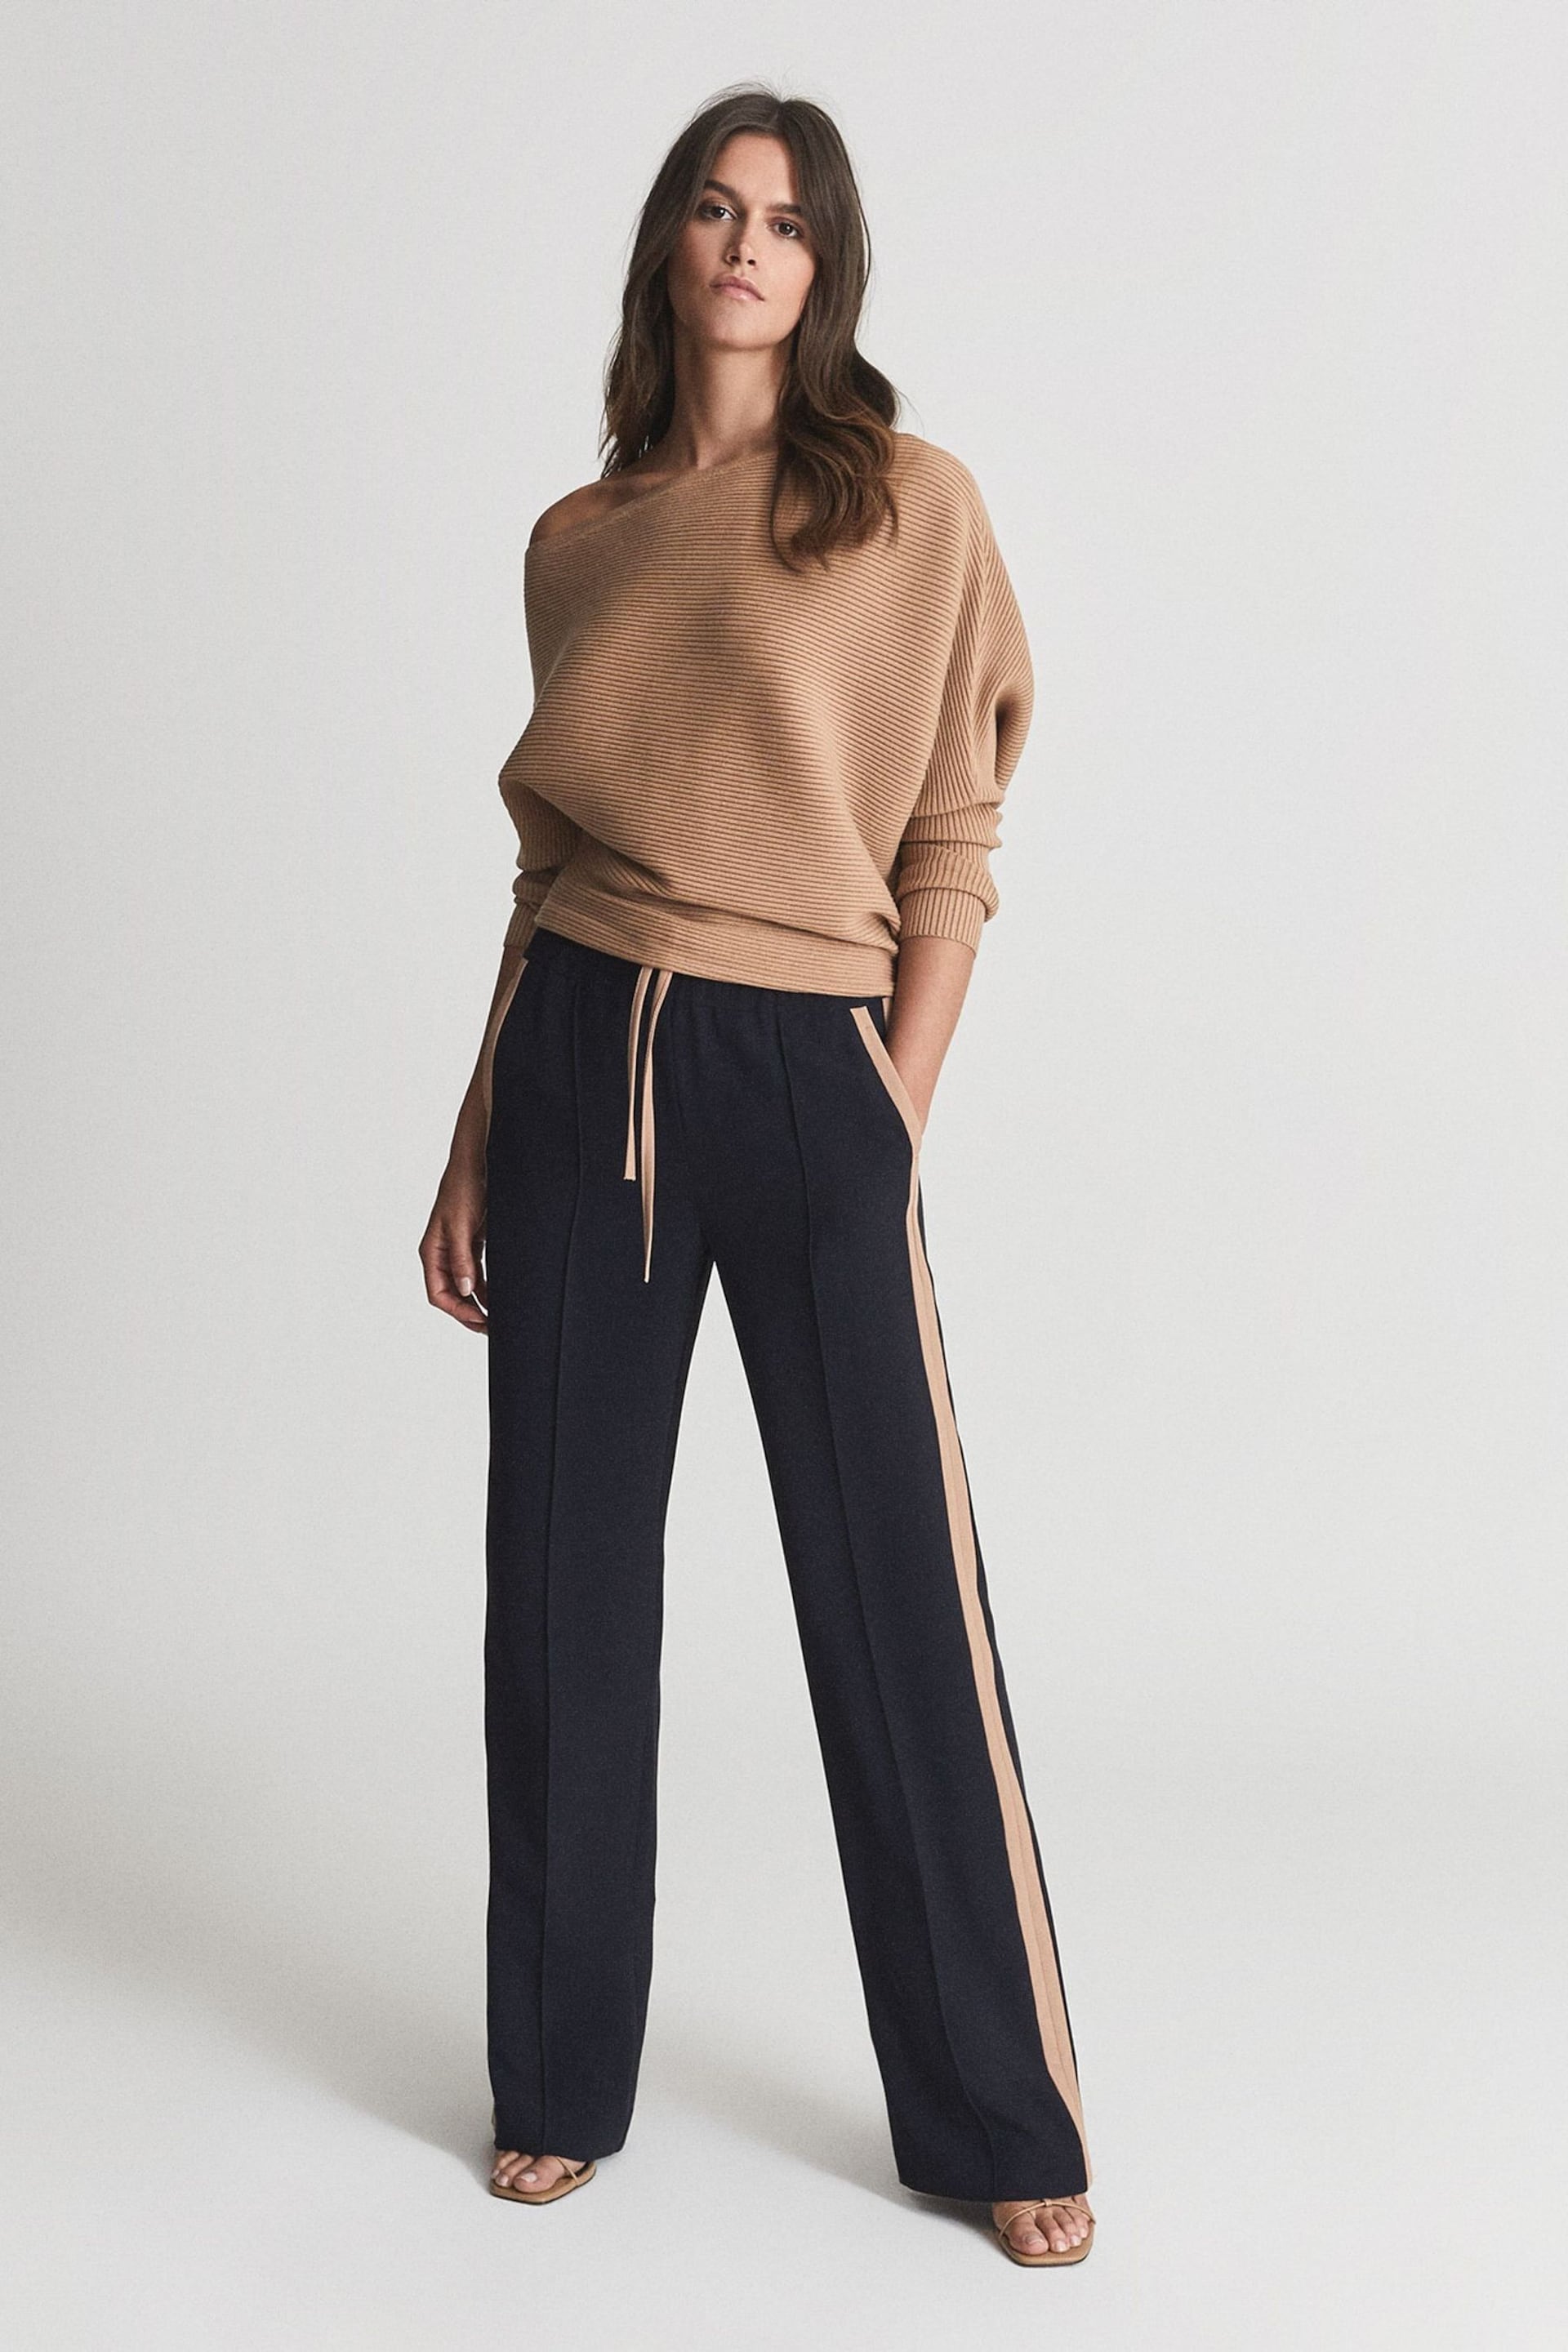 Reiss Lorna Asymmetric Knitted Top - Image 1 of 5